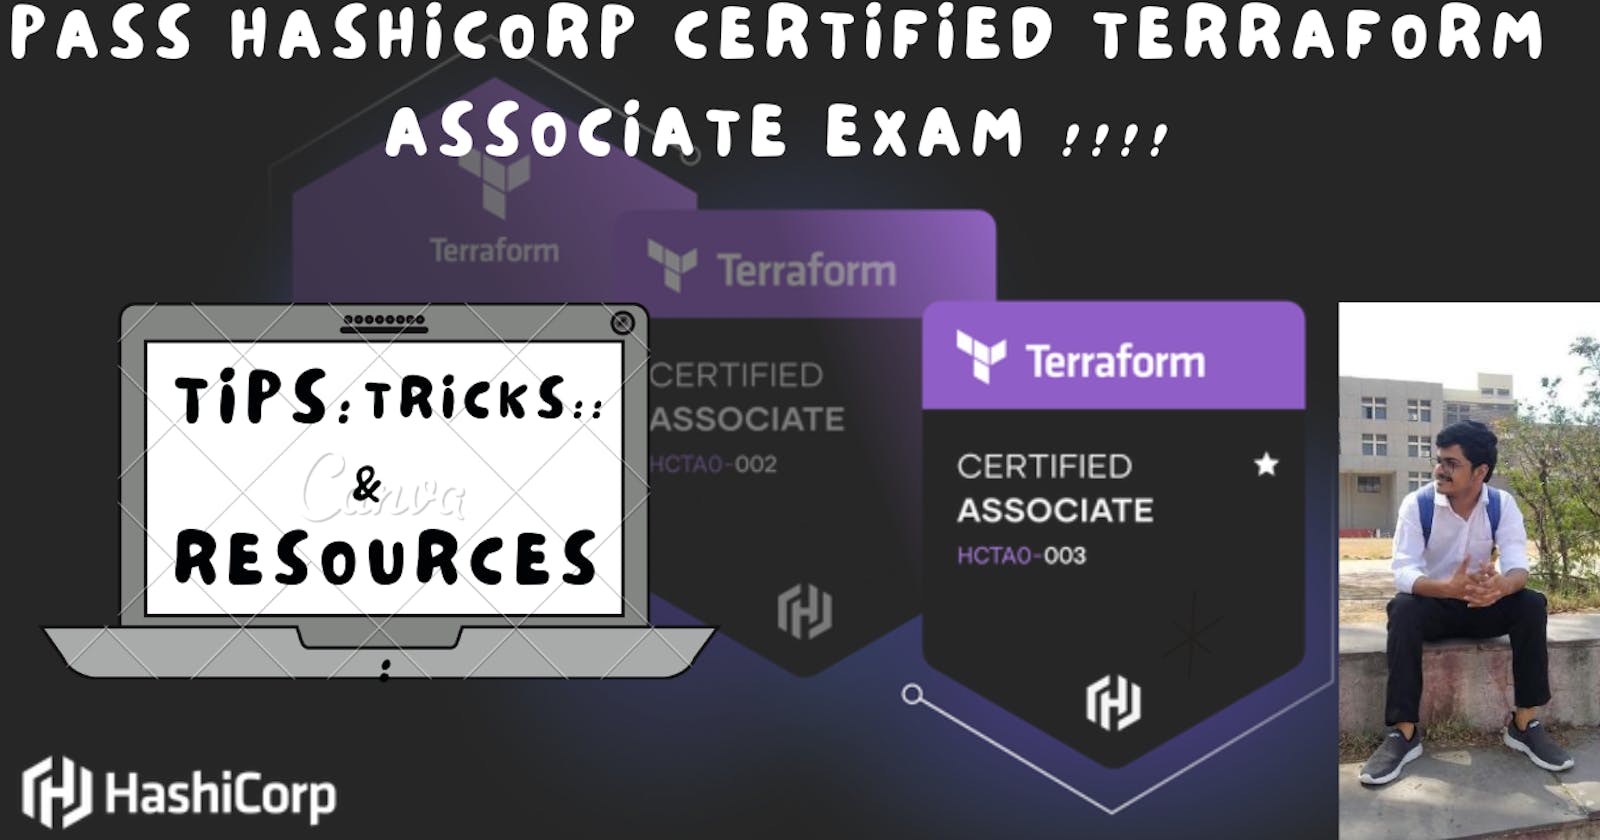 How I Passed Hashicorp Certified Terraform Associate Exam in First Attempt!